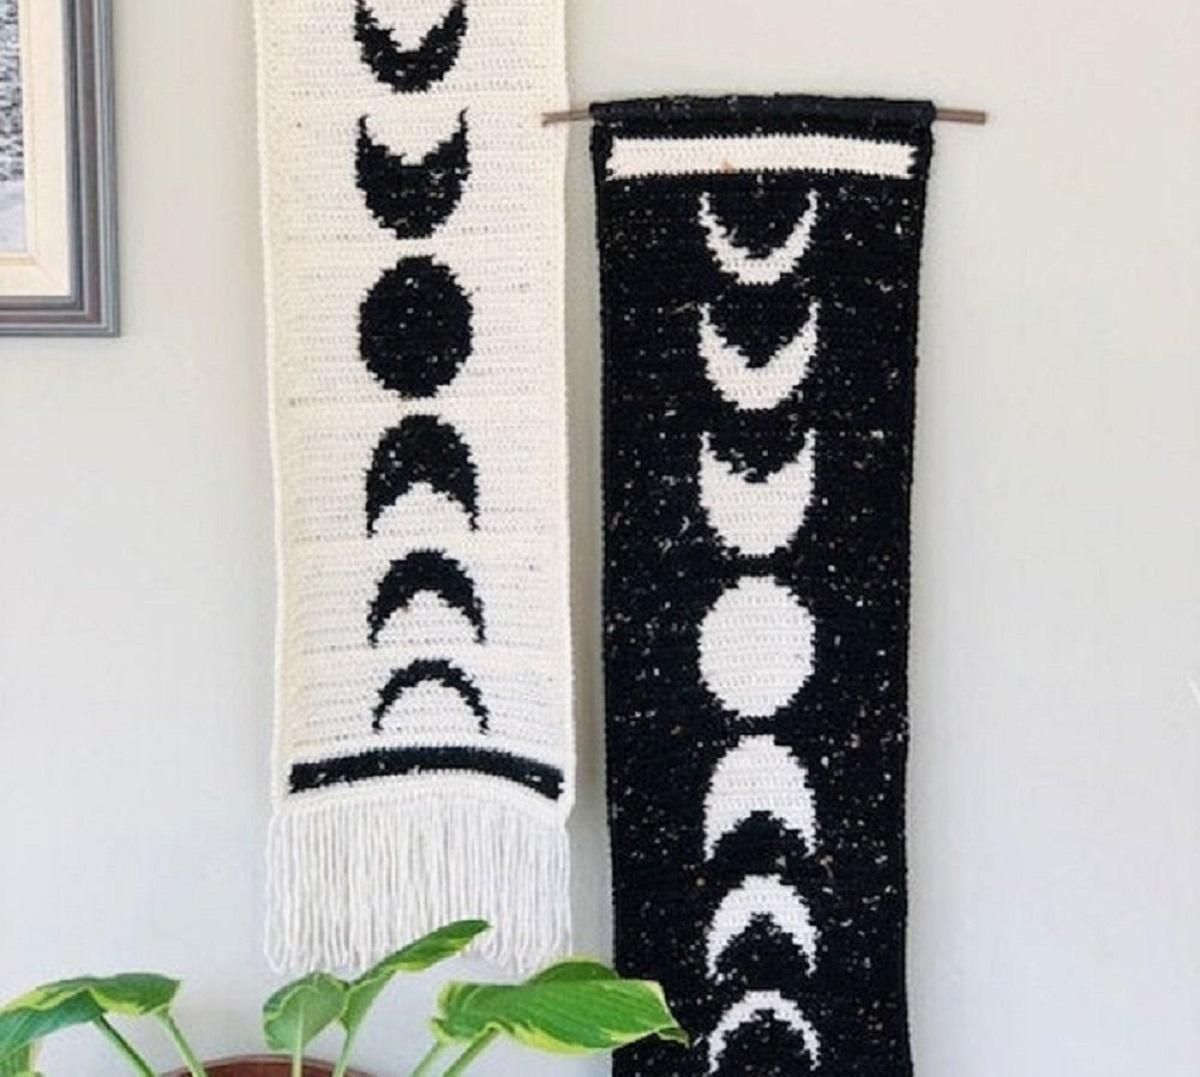 A white crochet wall hanging with black half moons, crescent moons, and full moons running down the center next to the same wall hanging in black.